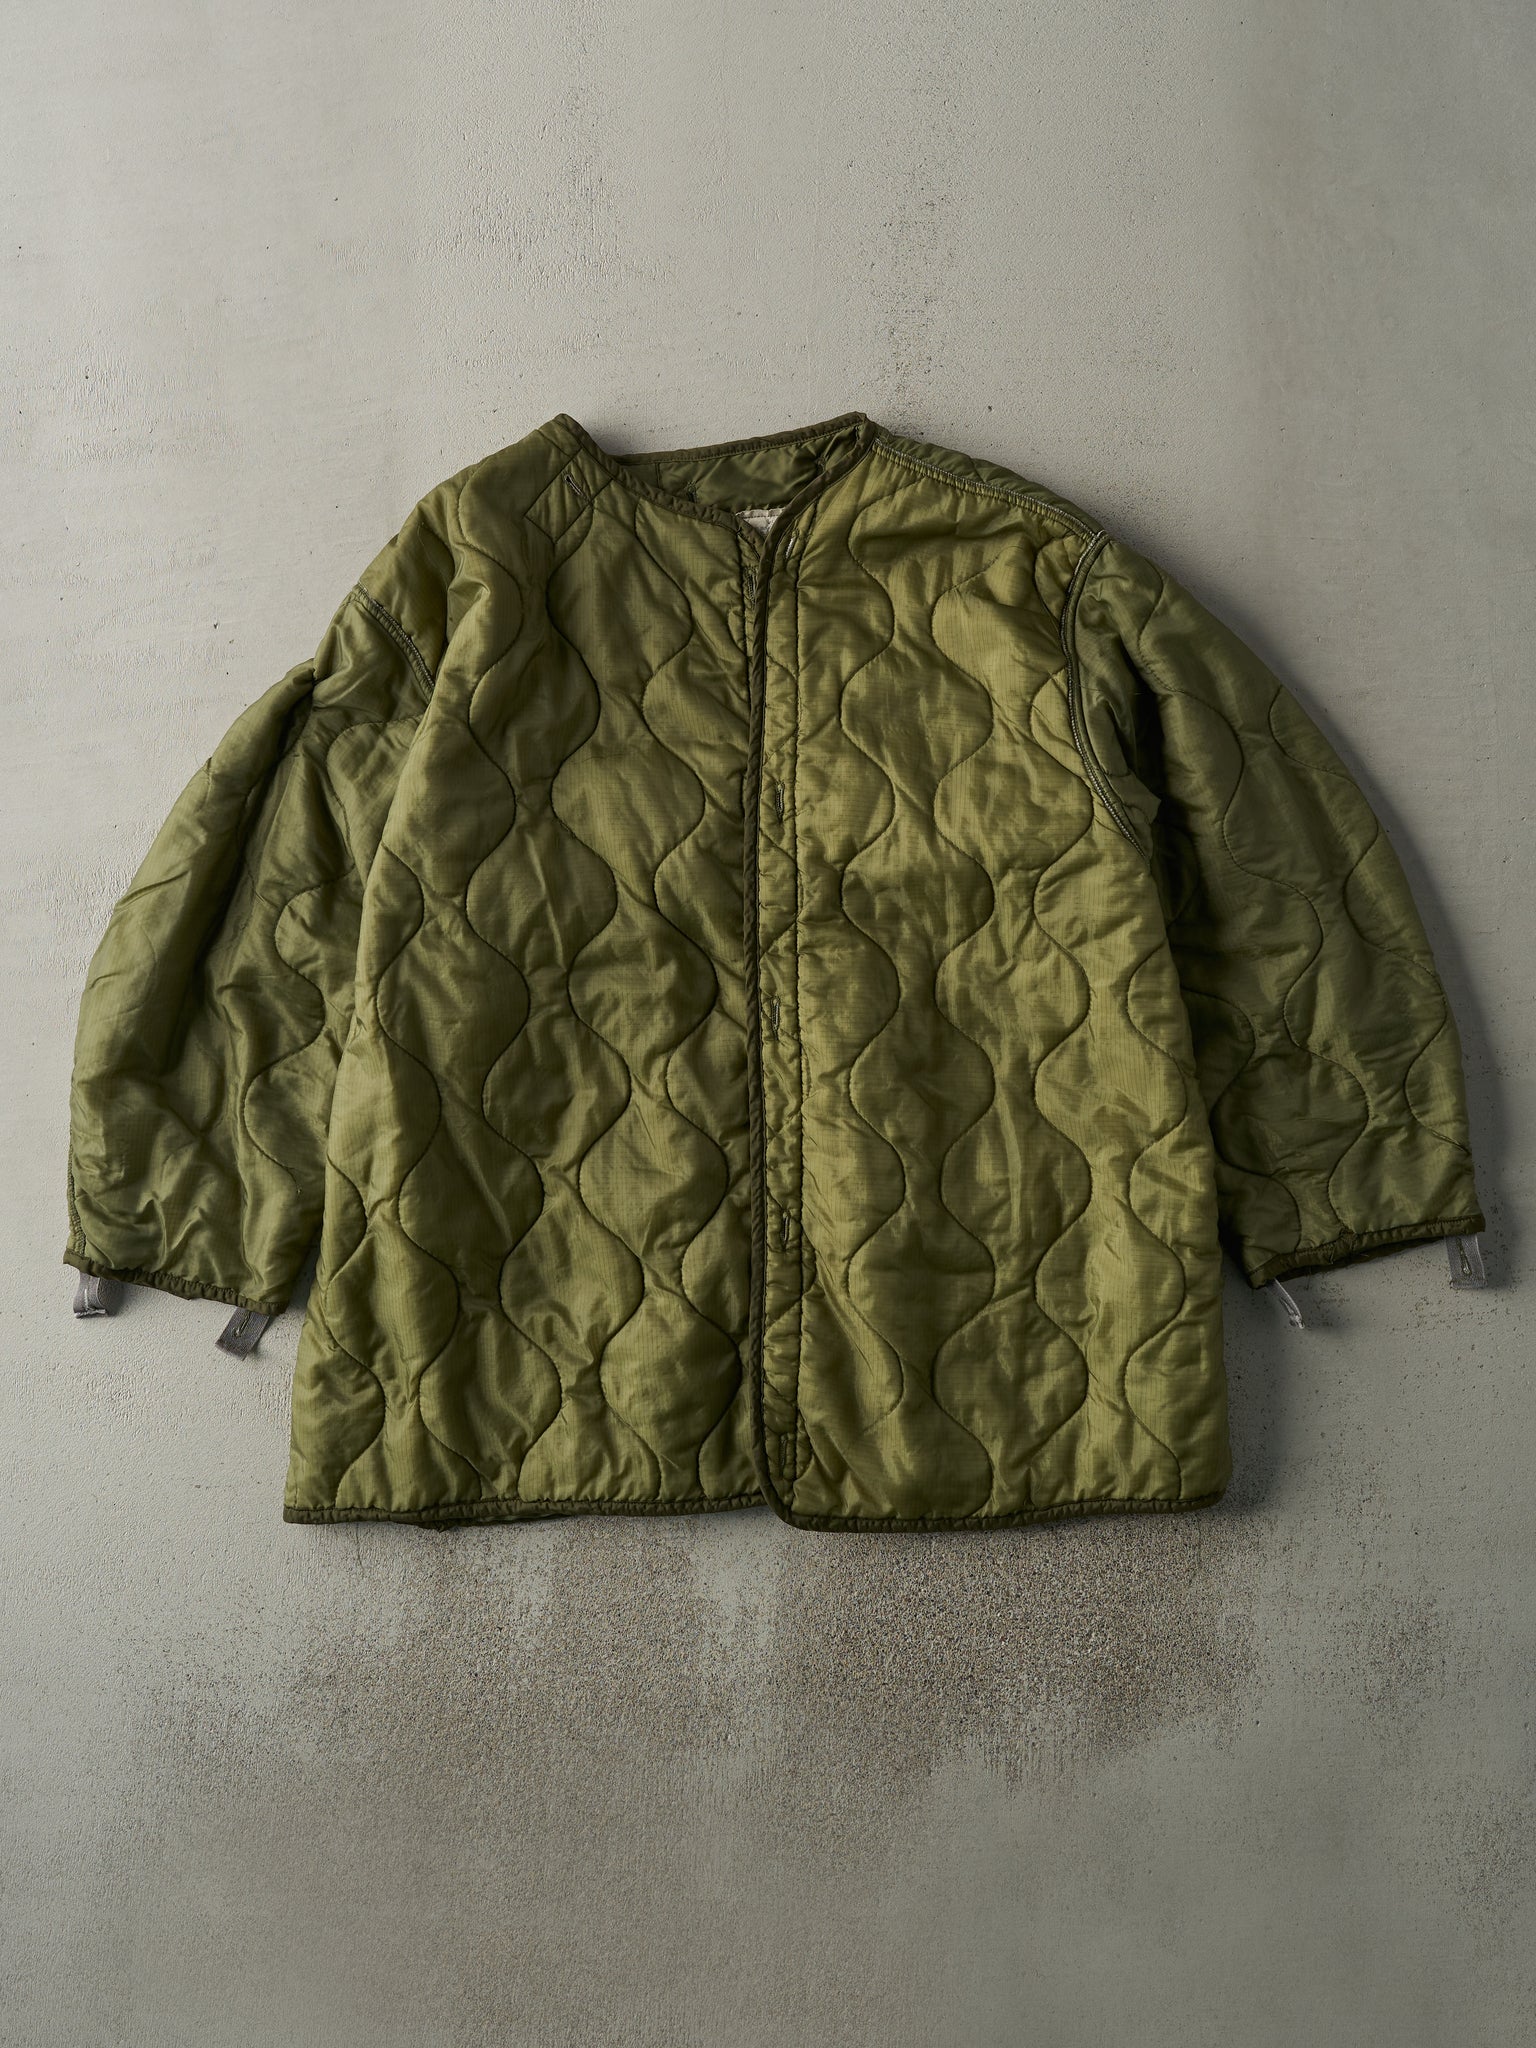 Vintage 90s Army Green Liner Jacket (XL)